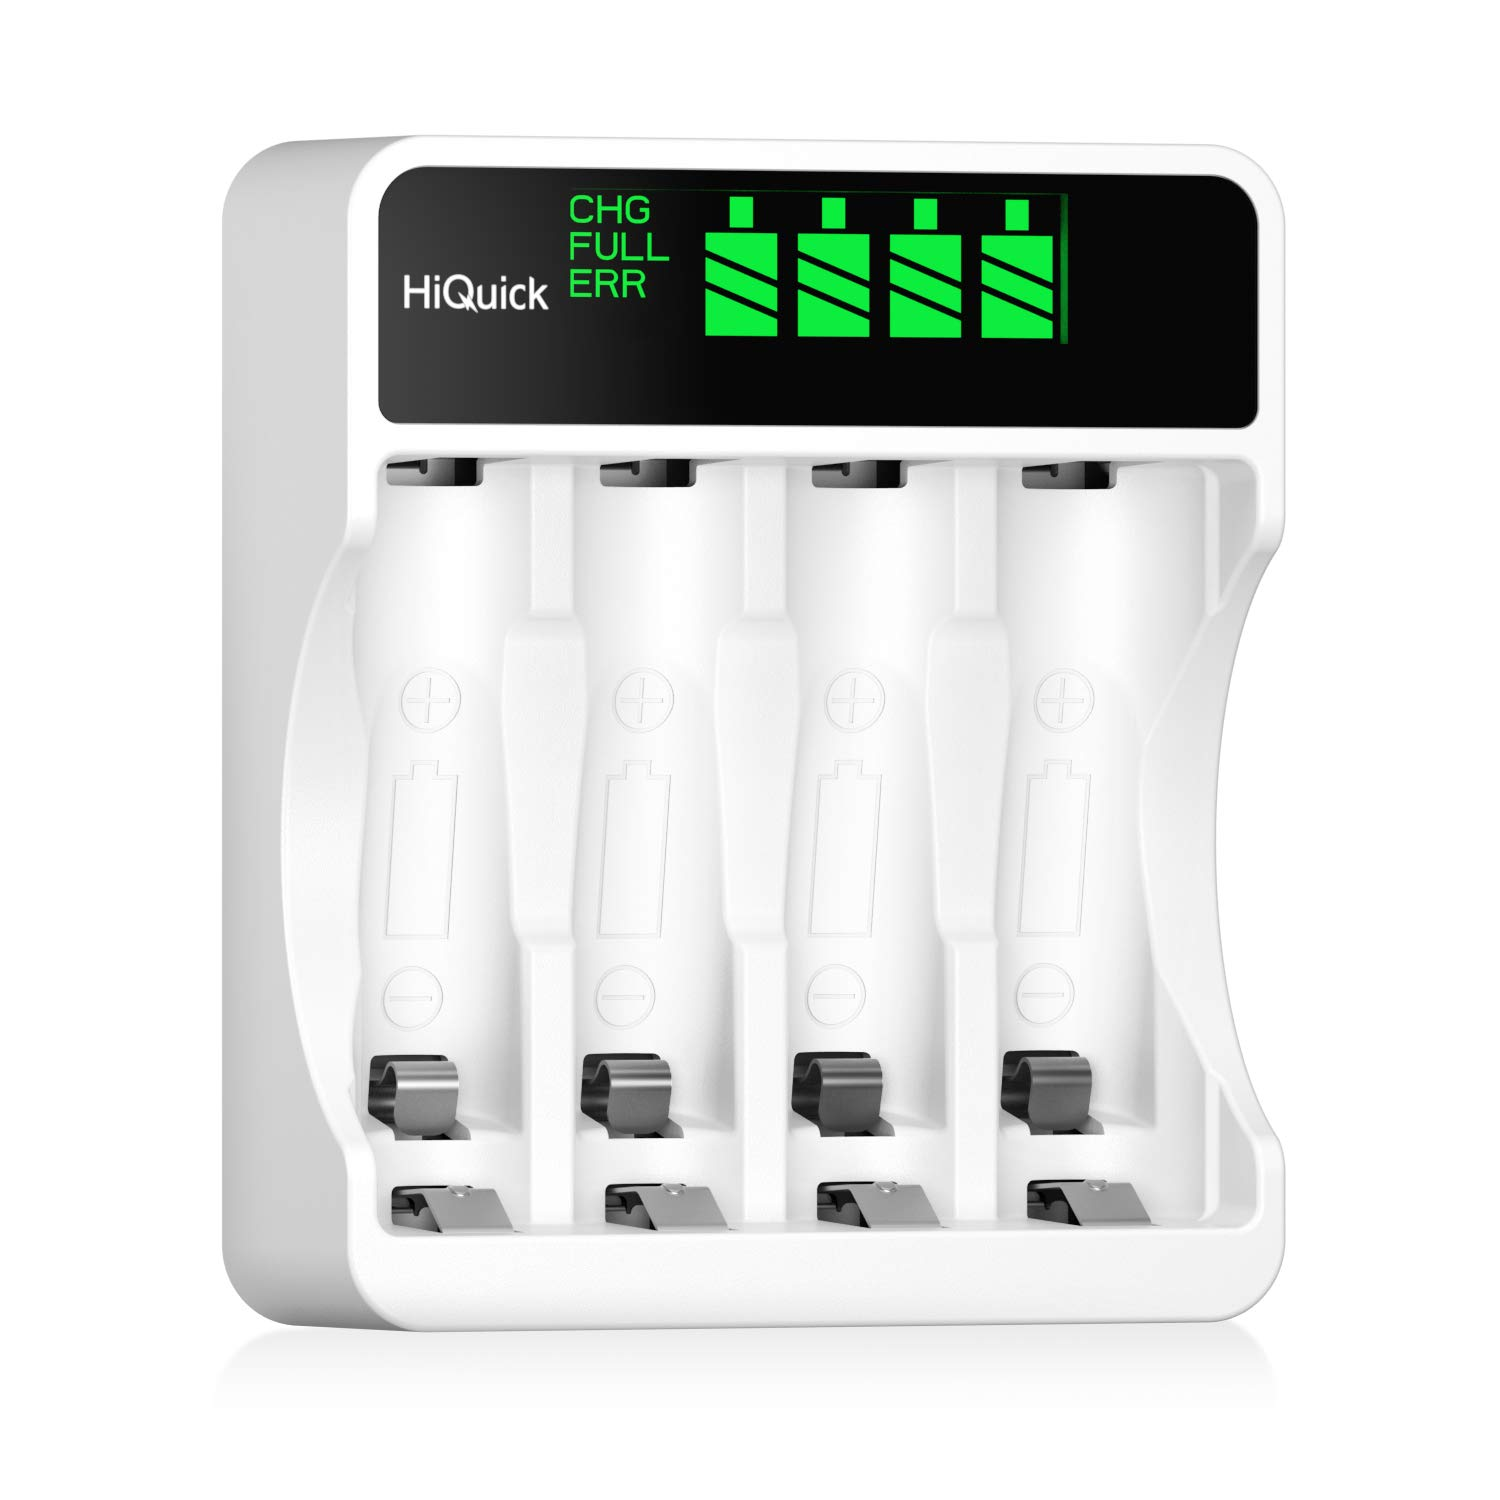 AA AAA Battery Charger with LCD,4 Bay AA AAA Rechargeable Battery Charger Fast Charging 2 Input Methods Slots Design for 1.2V Ni-Mh Ni-Cd AAA and Aa Rechargeable Batteries